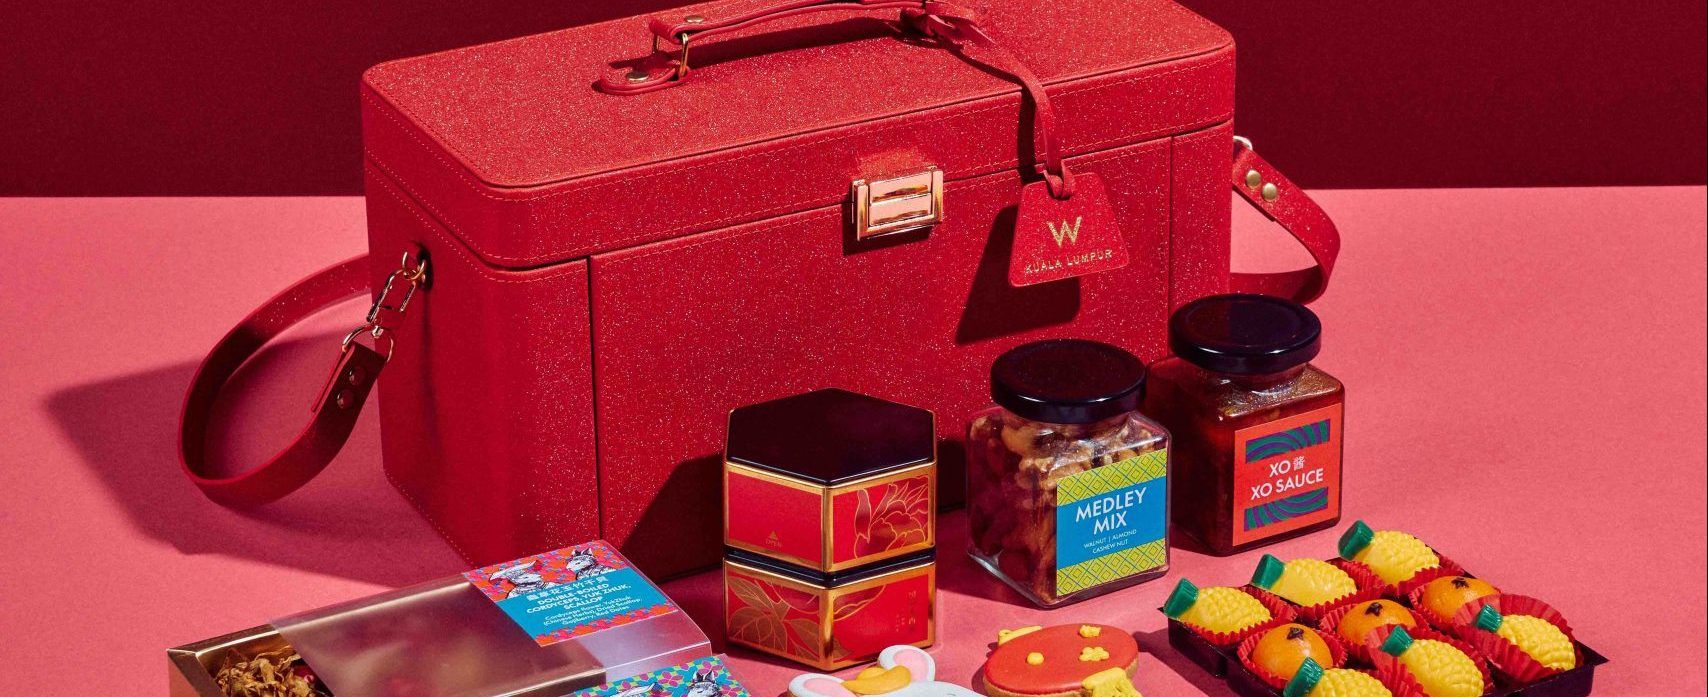 mylifestylenews: FURLA Presents 2023 Chinese New Year Capsule Collection